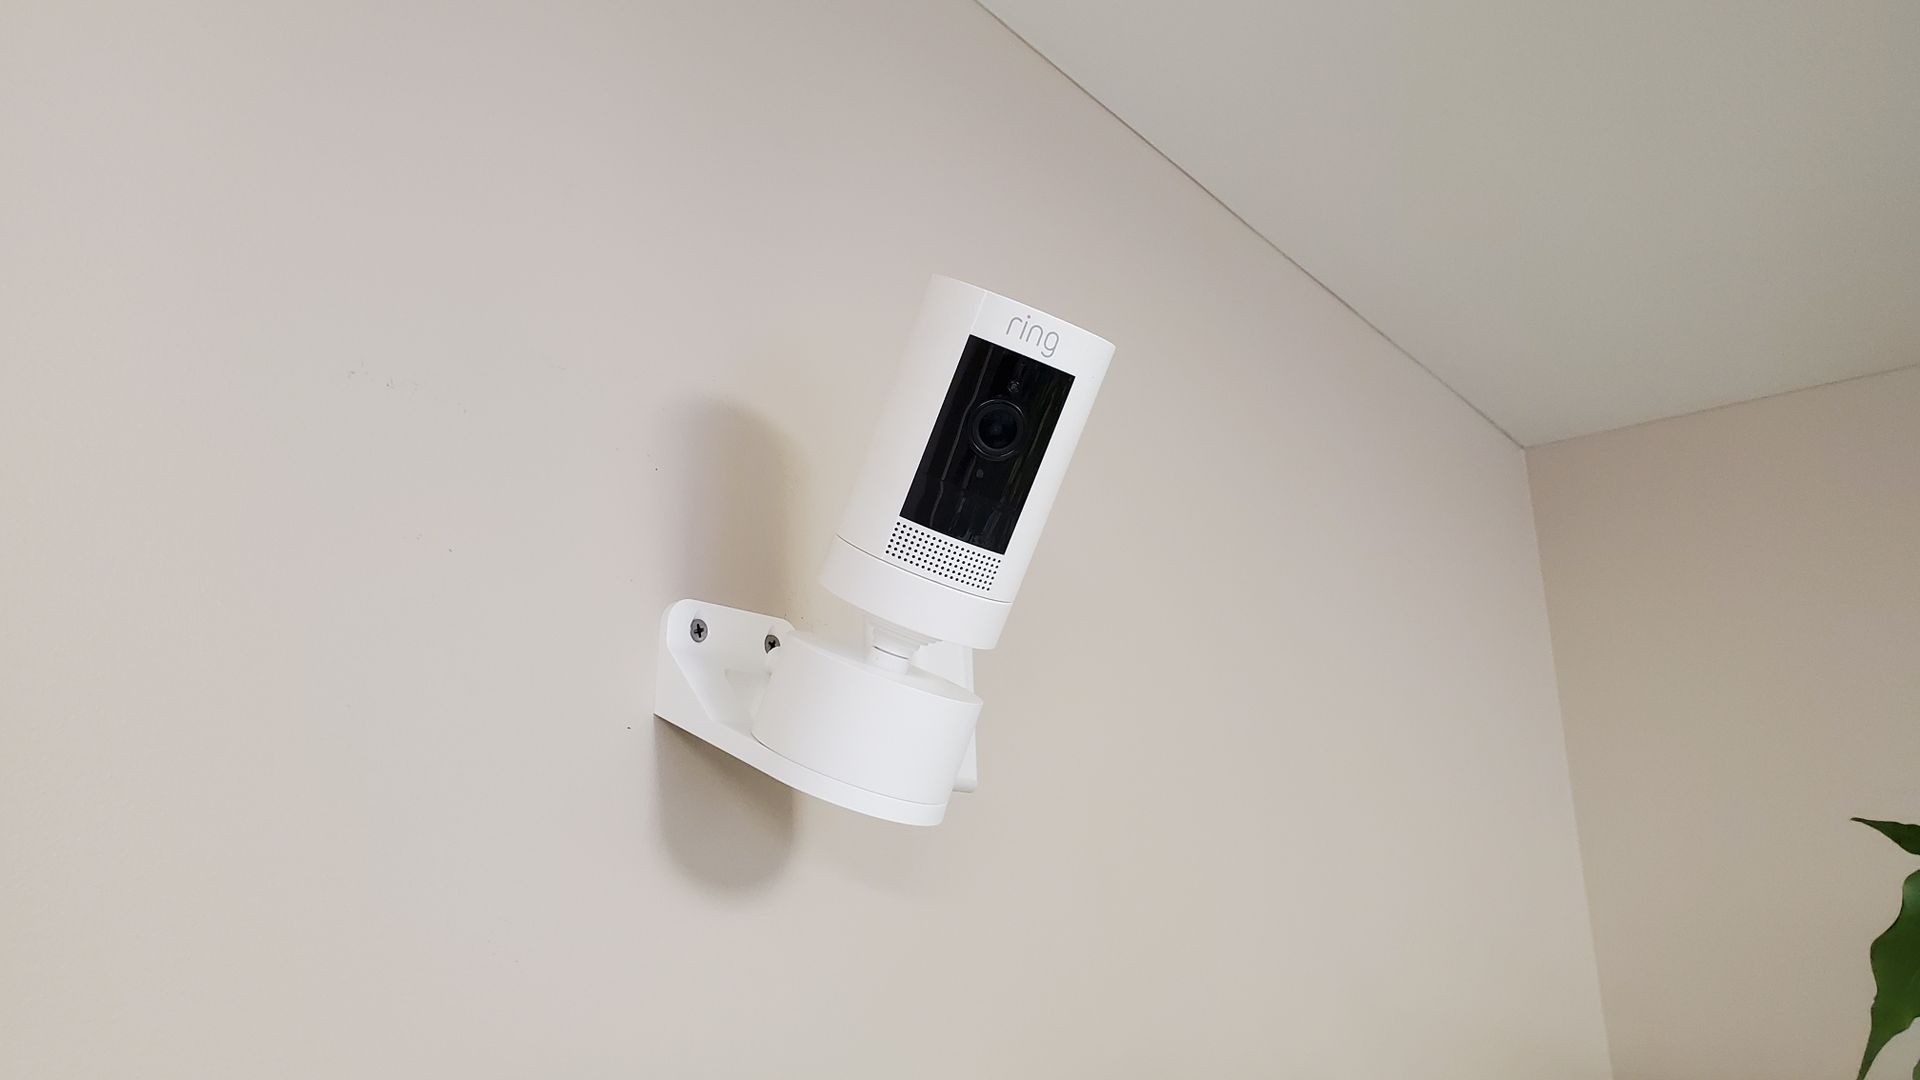 a security camera is mounted on a wall in a room installed by fisher electronics in northern ohio